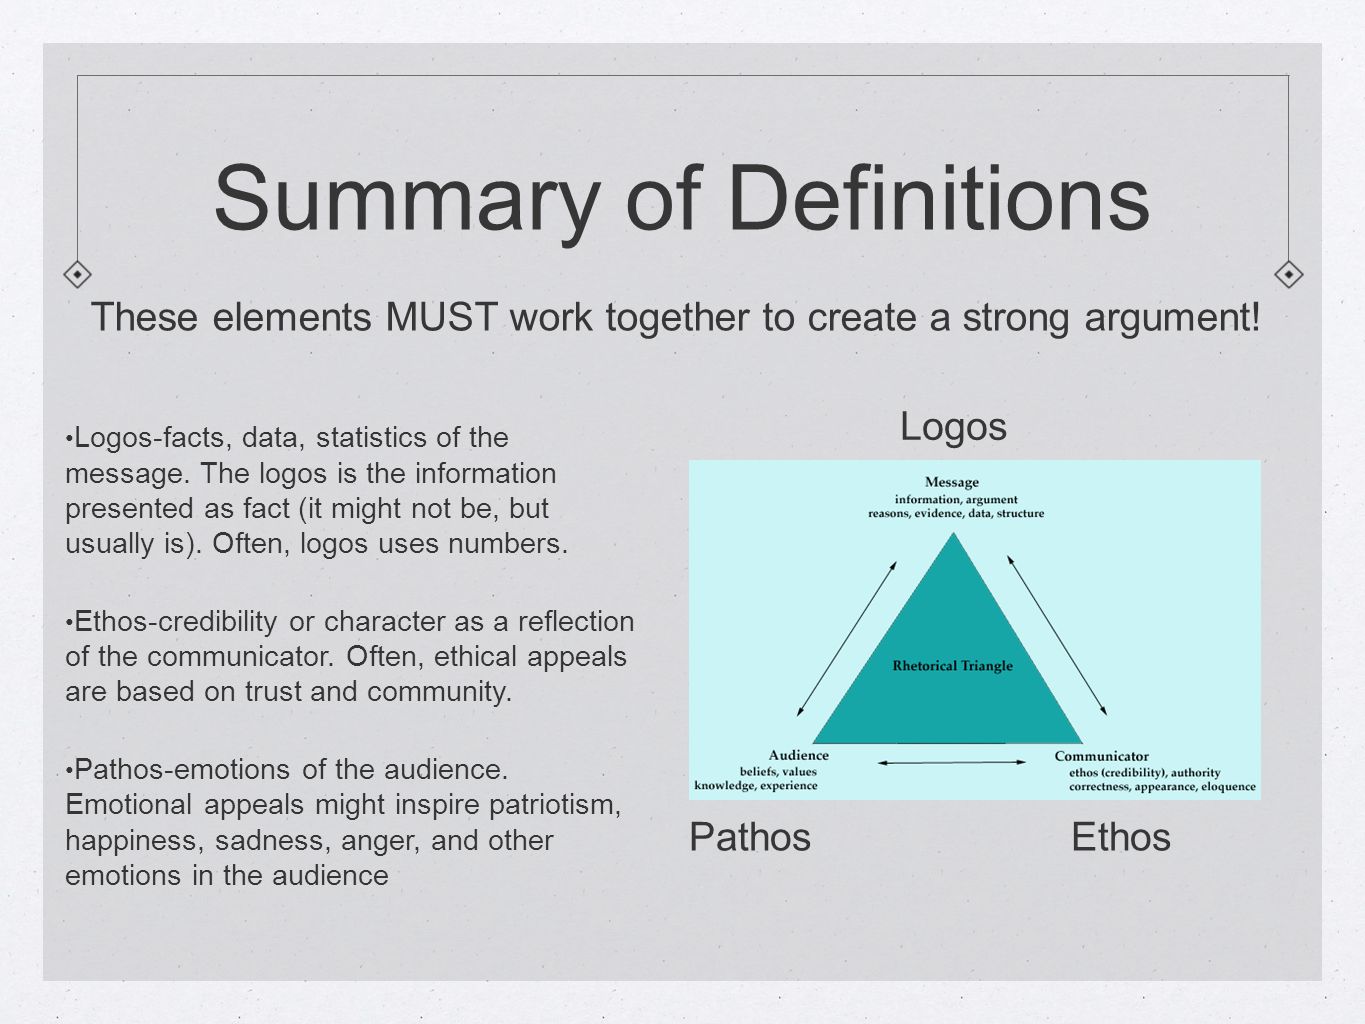 Summary of Definitions Logos-facts, data, statistics of the message.